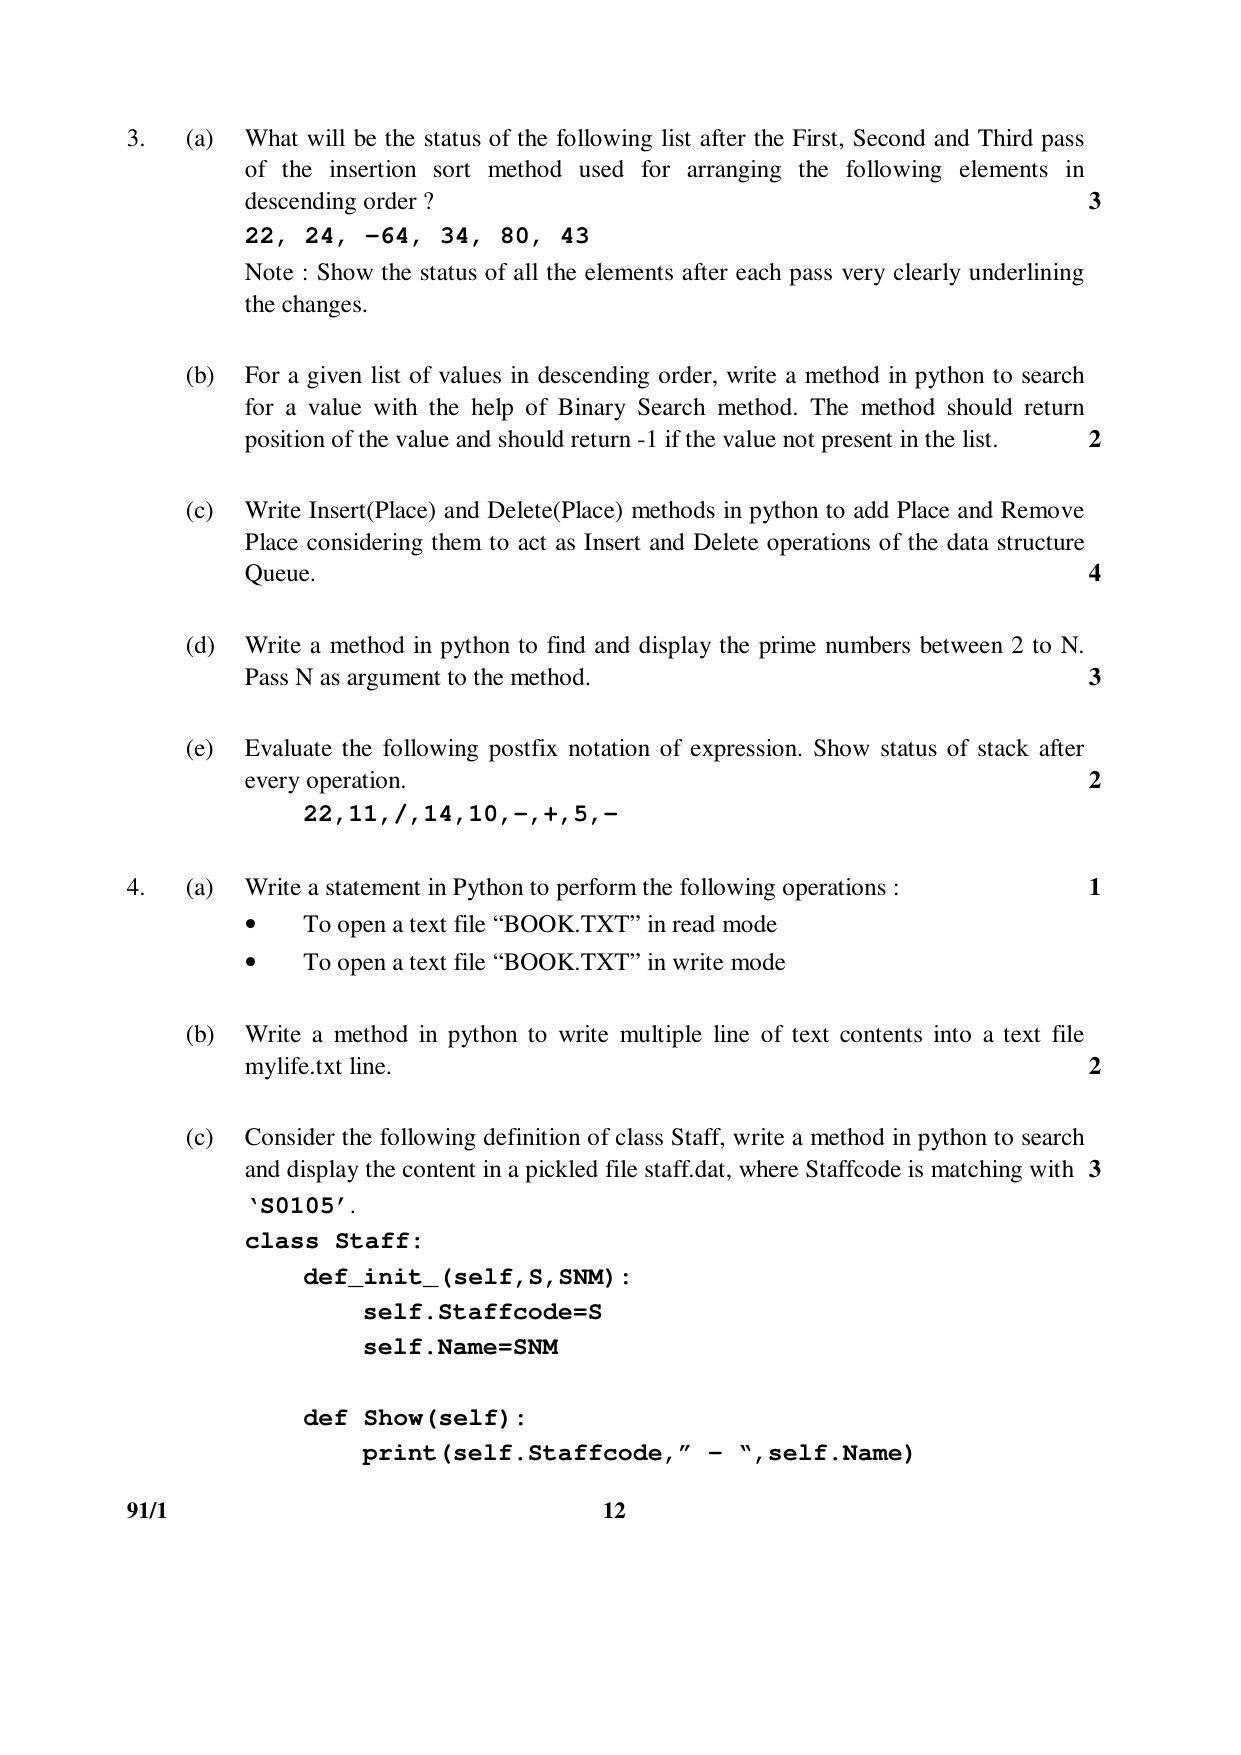 CBSE Class 12 91-1 COMPUTER SCIENCE 2016 Question Paper - Page 12